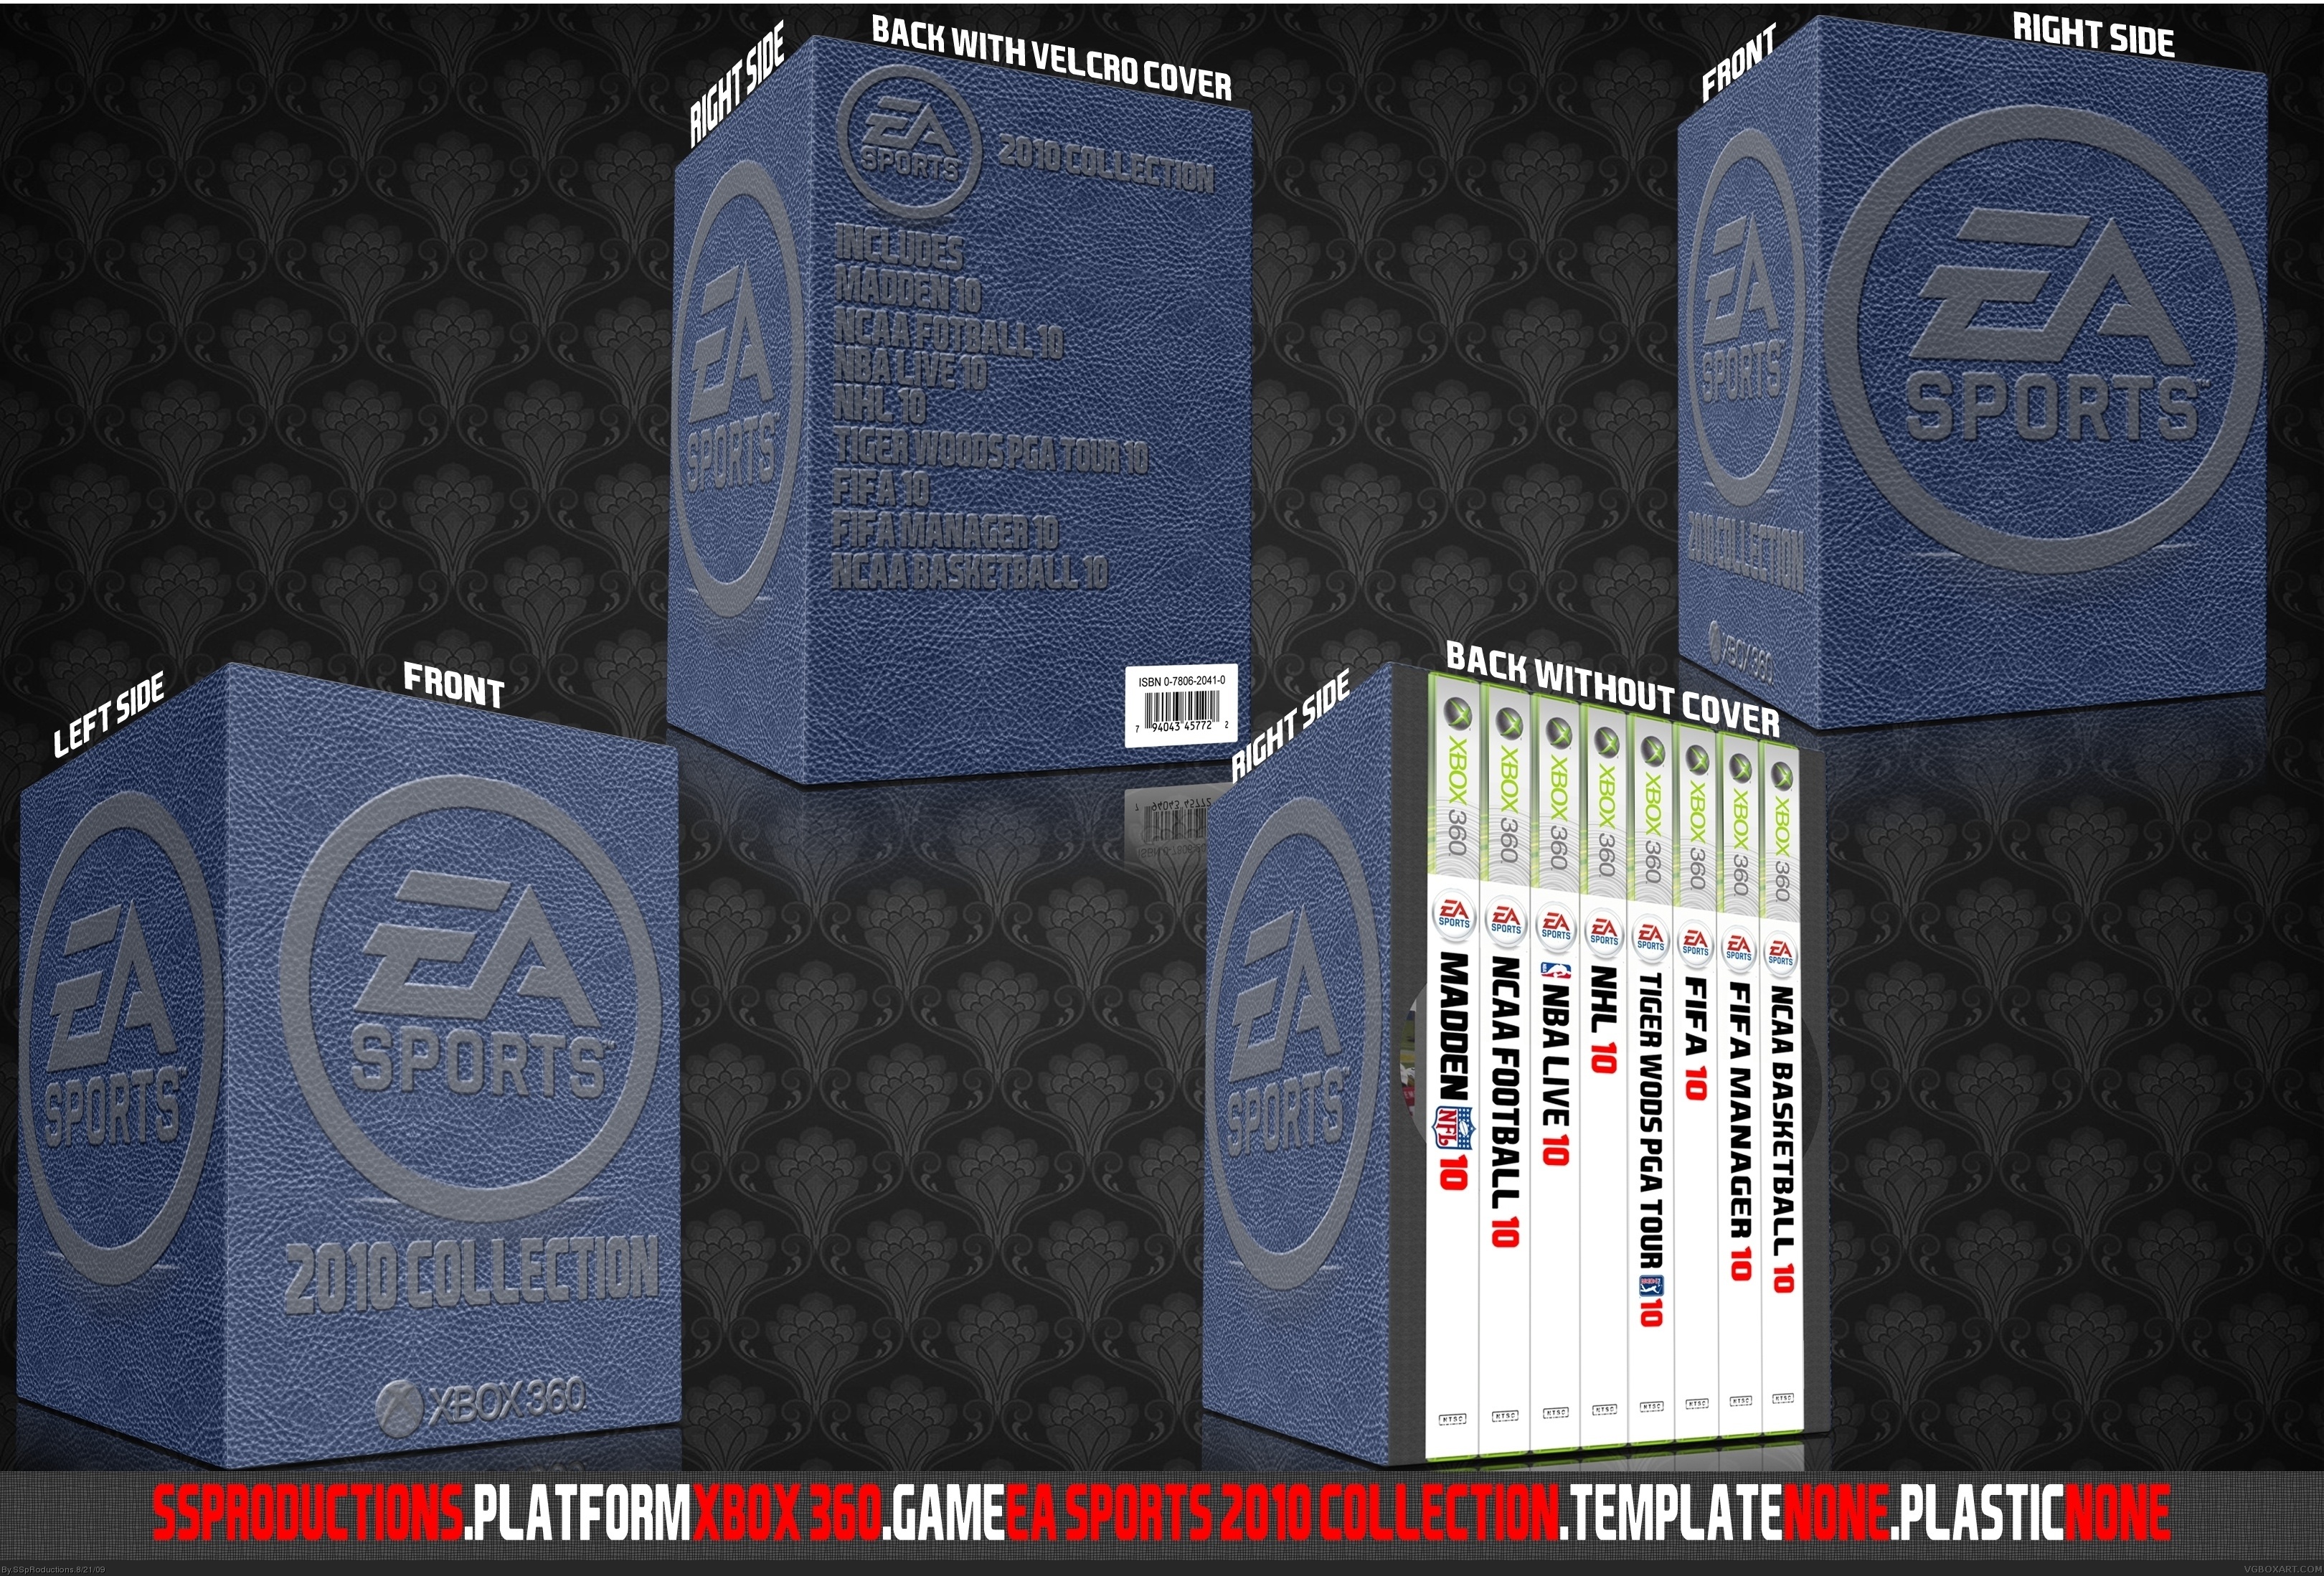 EA Sports 2010 Collection box cover